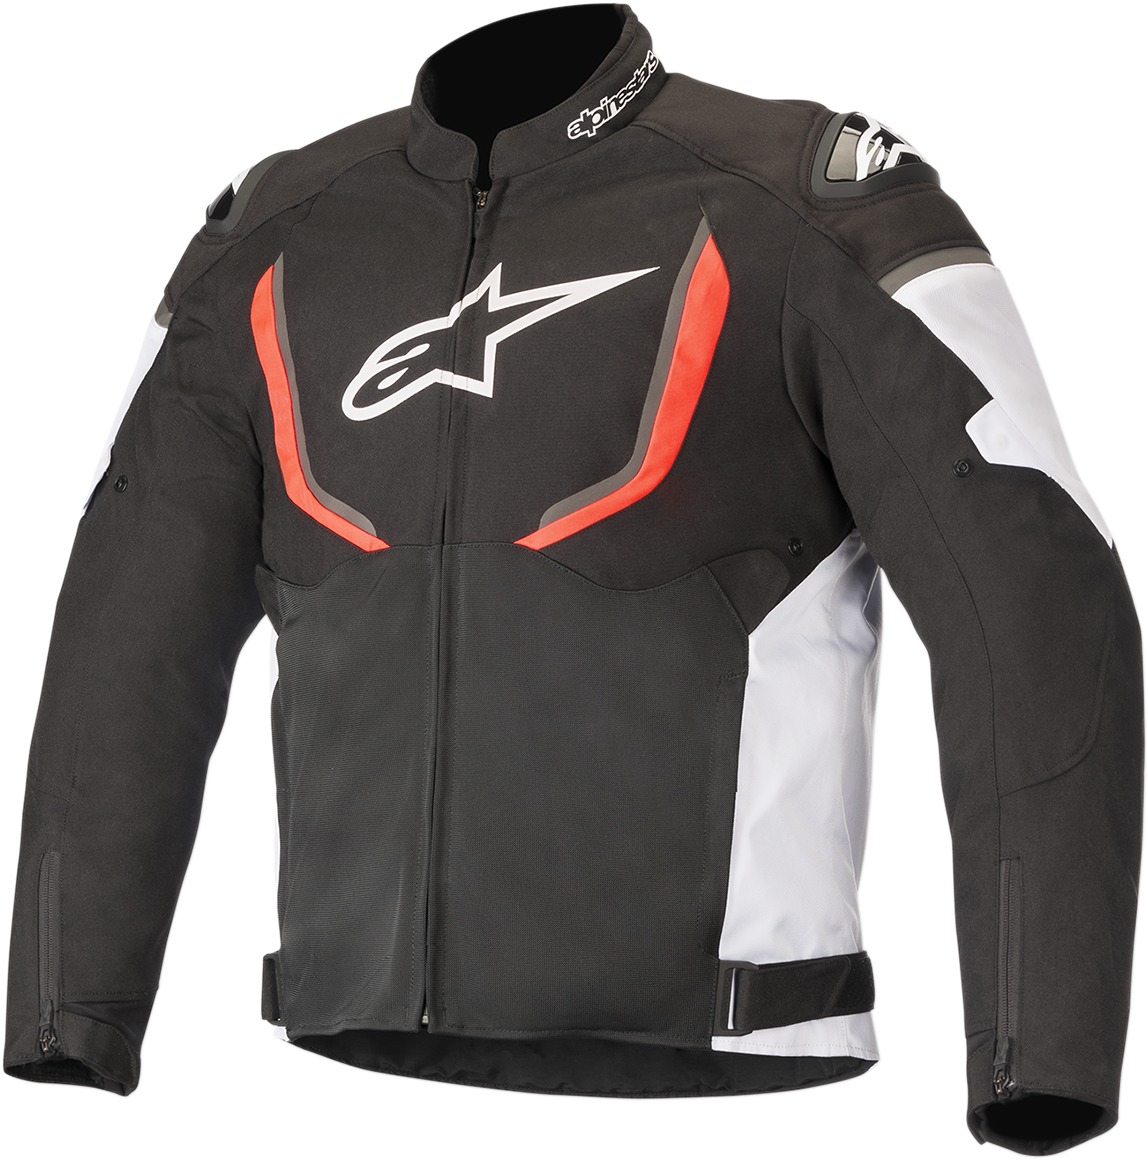 T-GPR v2 Air Motorcycle Jacket Black/Red/White US Small - Click Image to Close